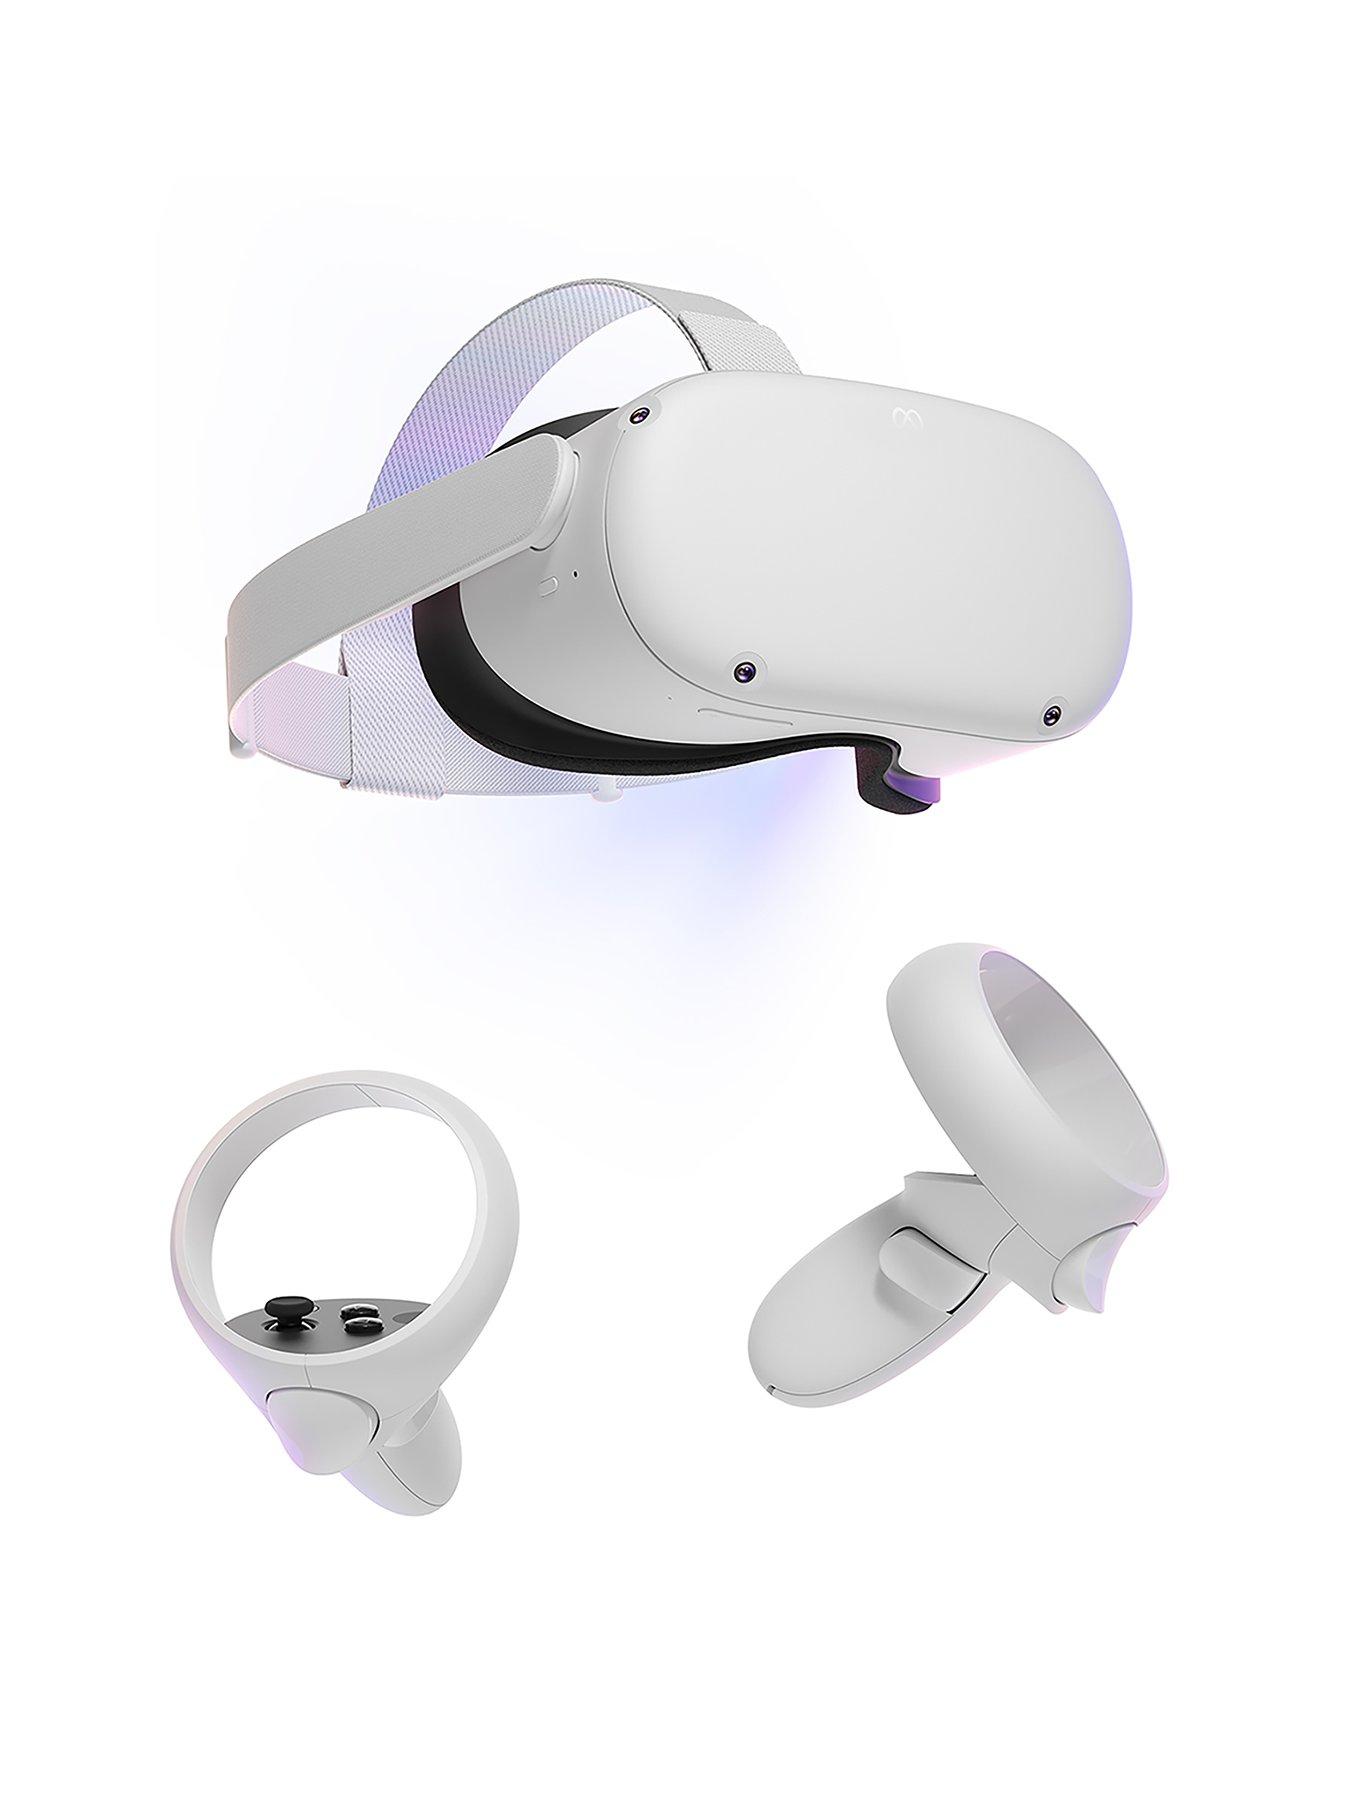 Meta Quest 2 128GB, All-in-One VR Headset